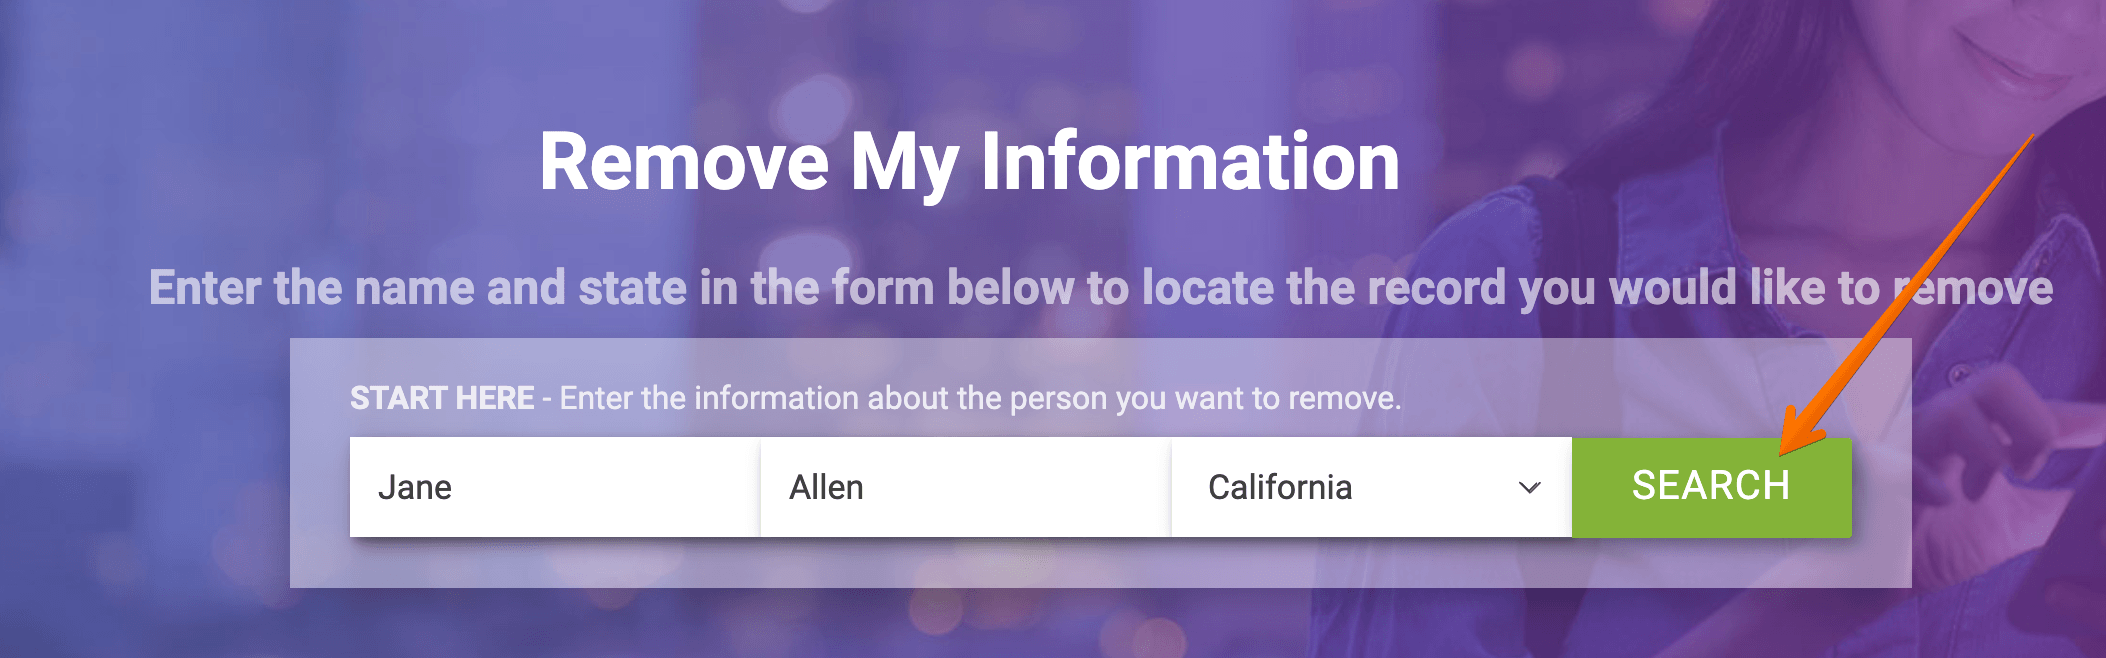 Enter your first and last name, select your state and click "Search"